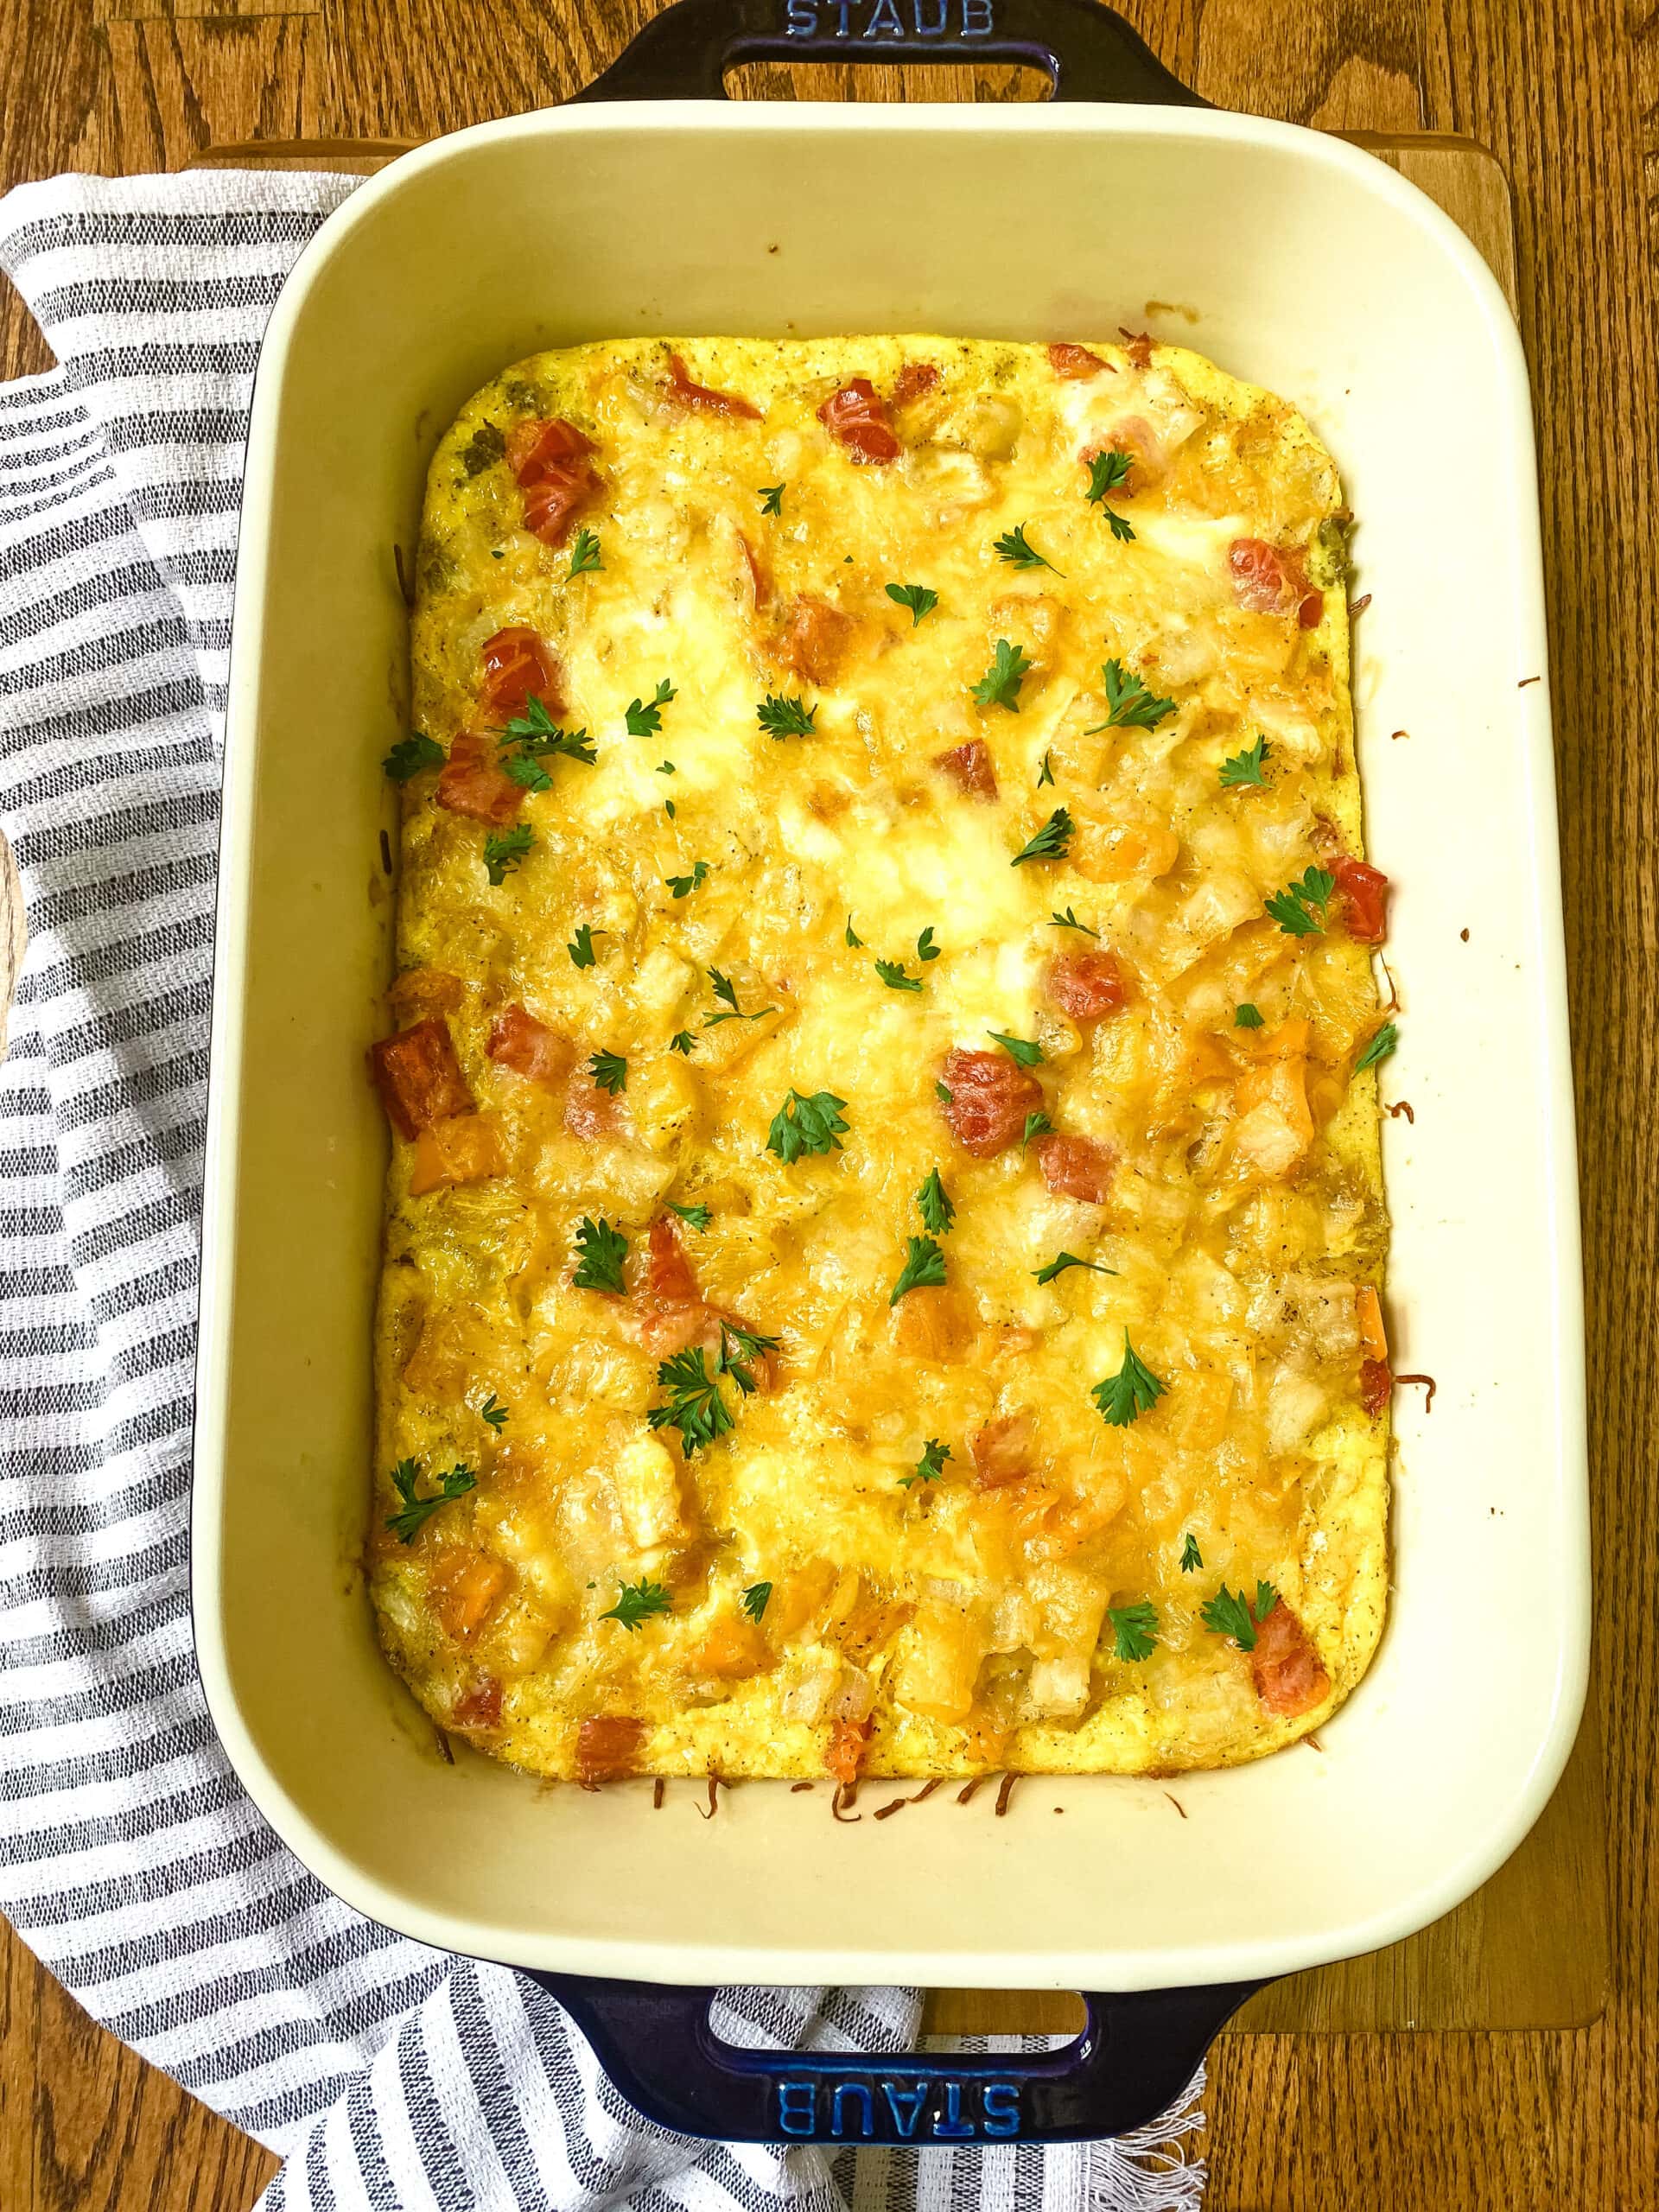 Sausage, Egg, And Cheese Breakfast Casserole - Cooking With Fudge